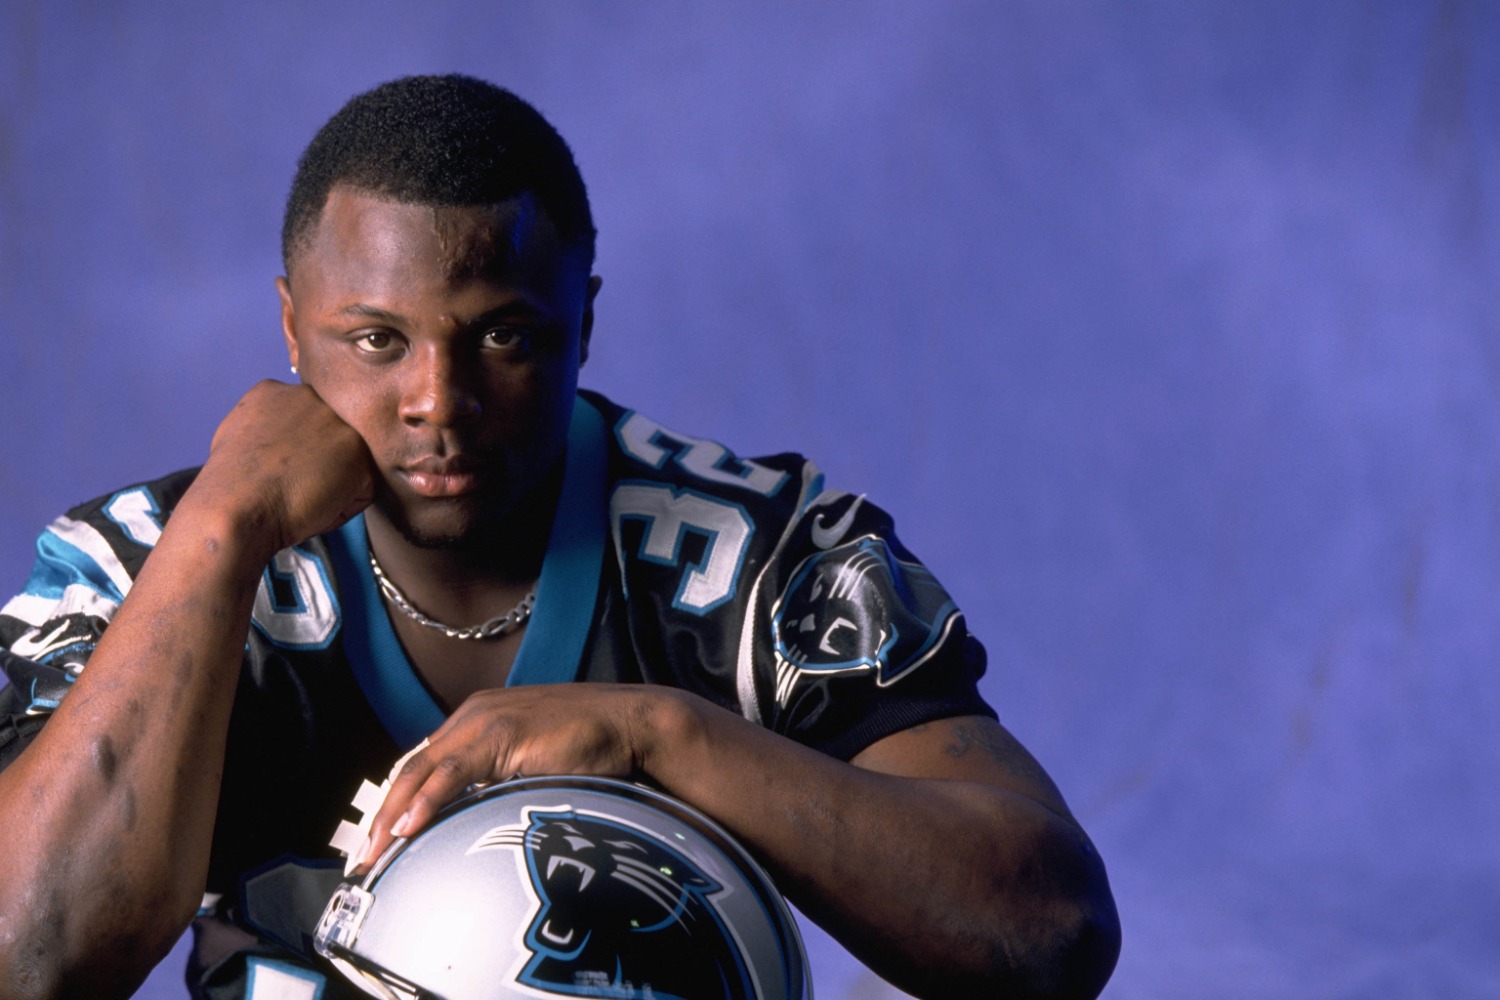 Carolina Panthers running back Fred Lane suffered a tragic death when his wife shot and killed him.